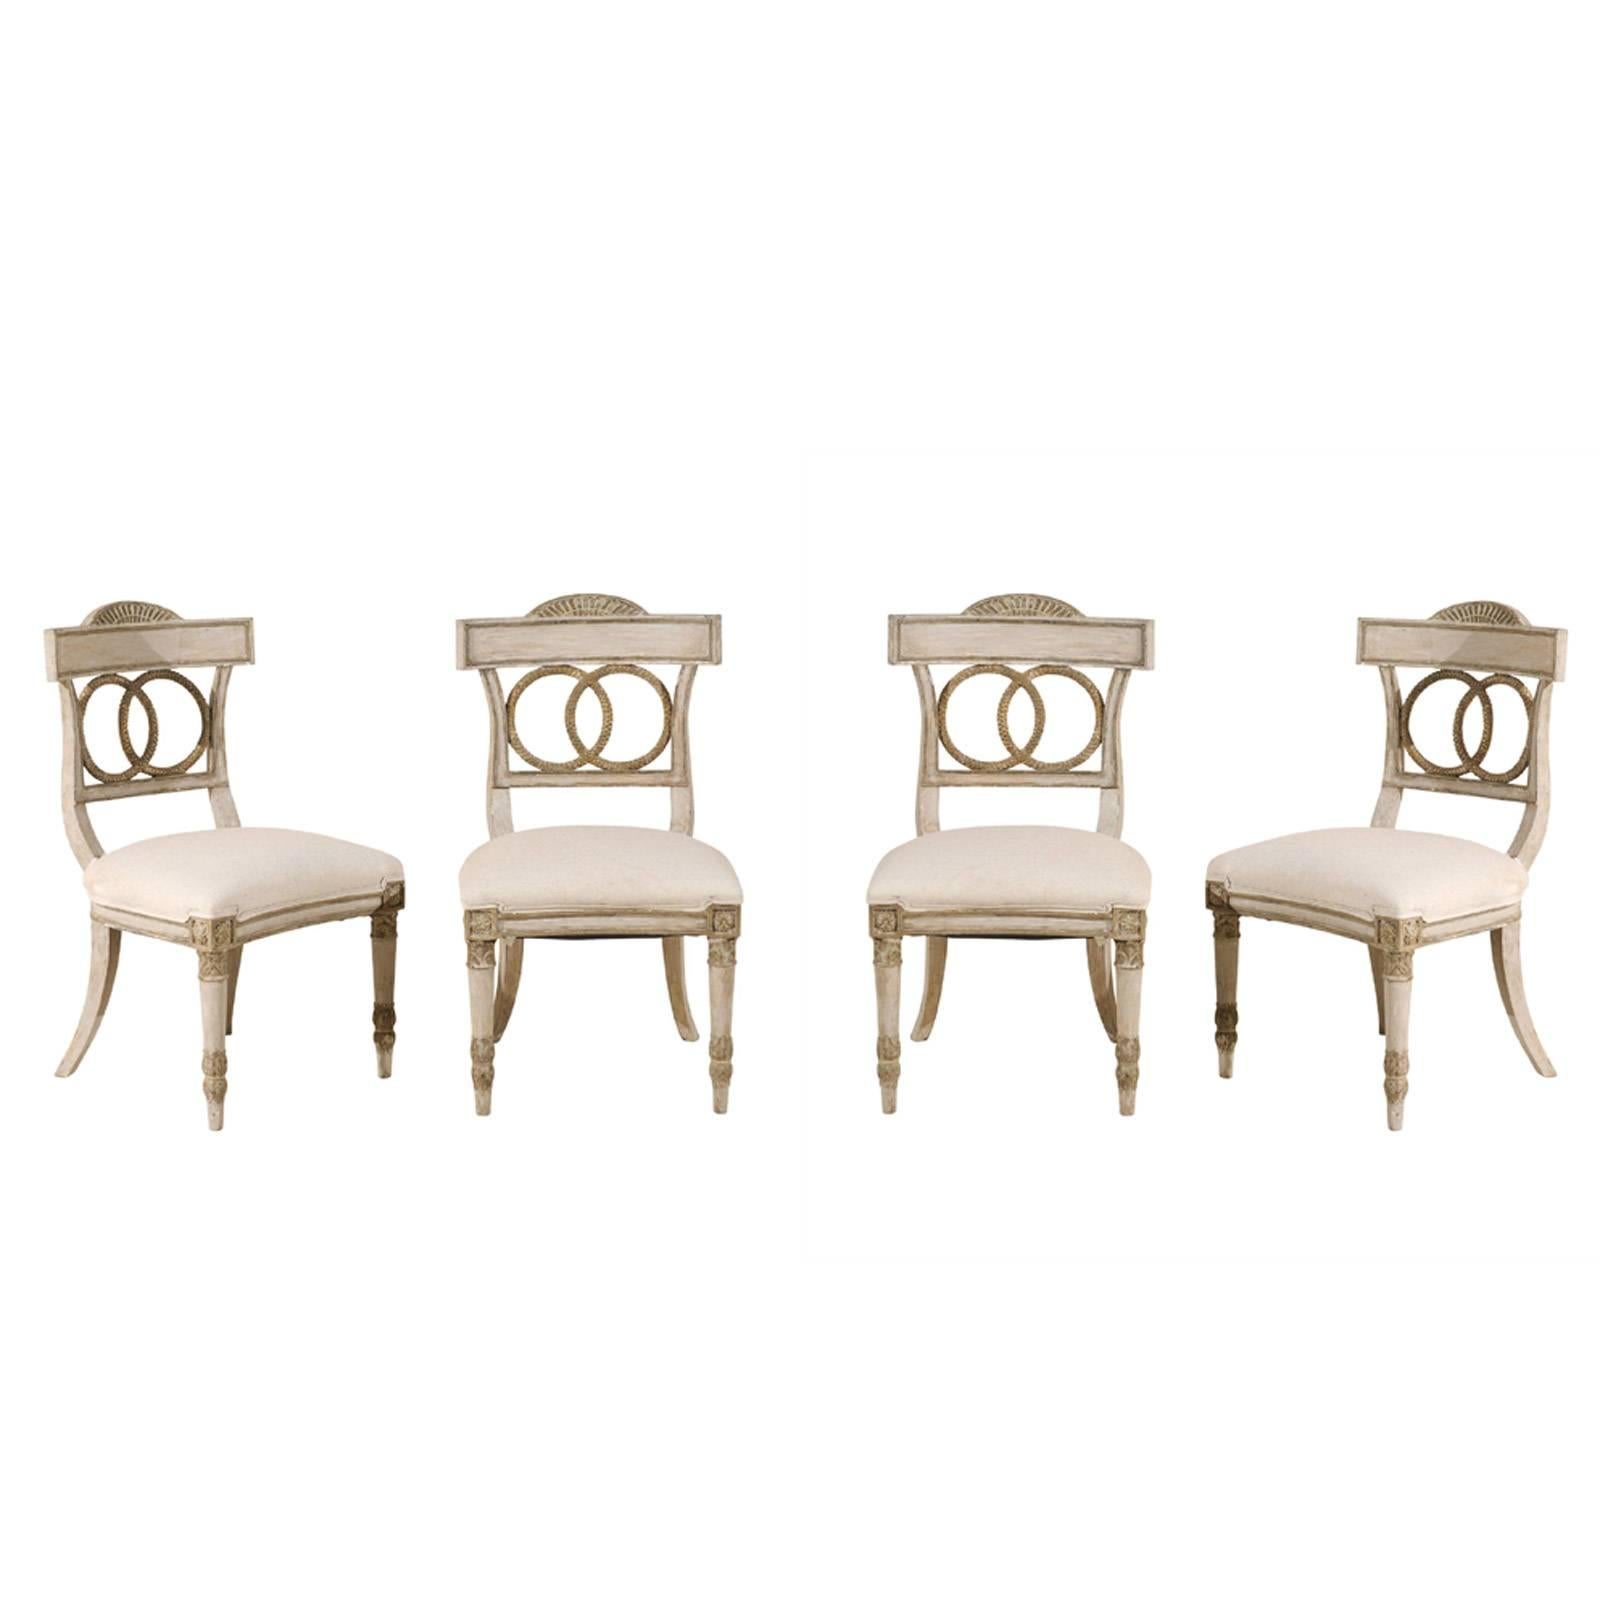 Set of Four European Painted Wood Chairs